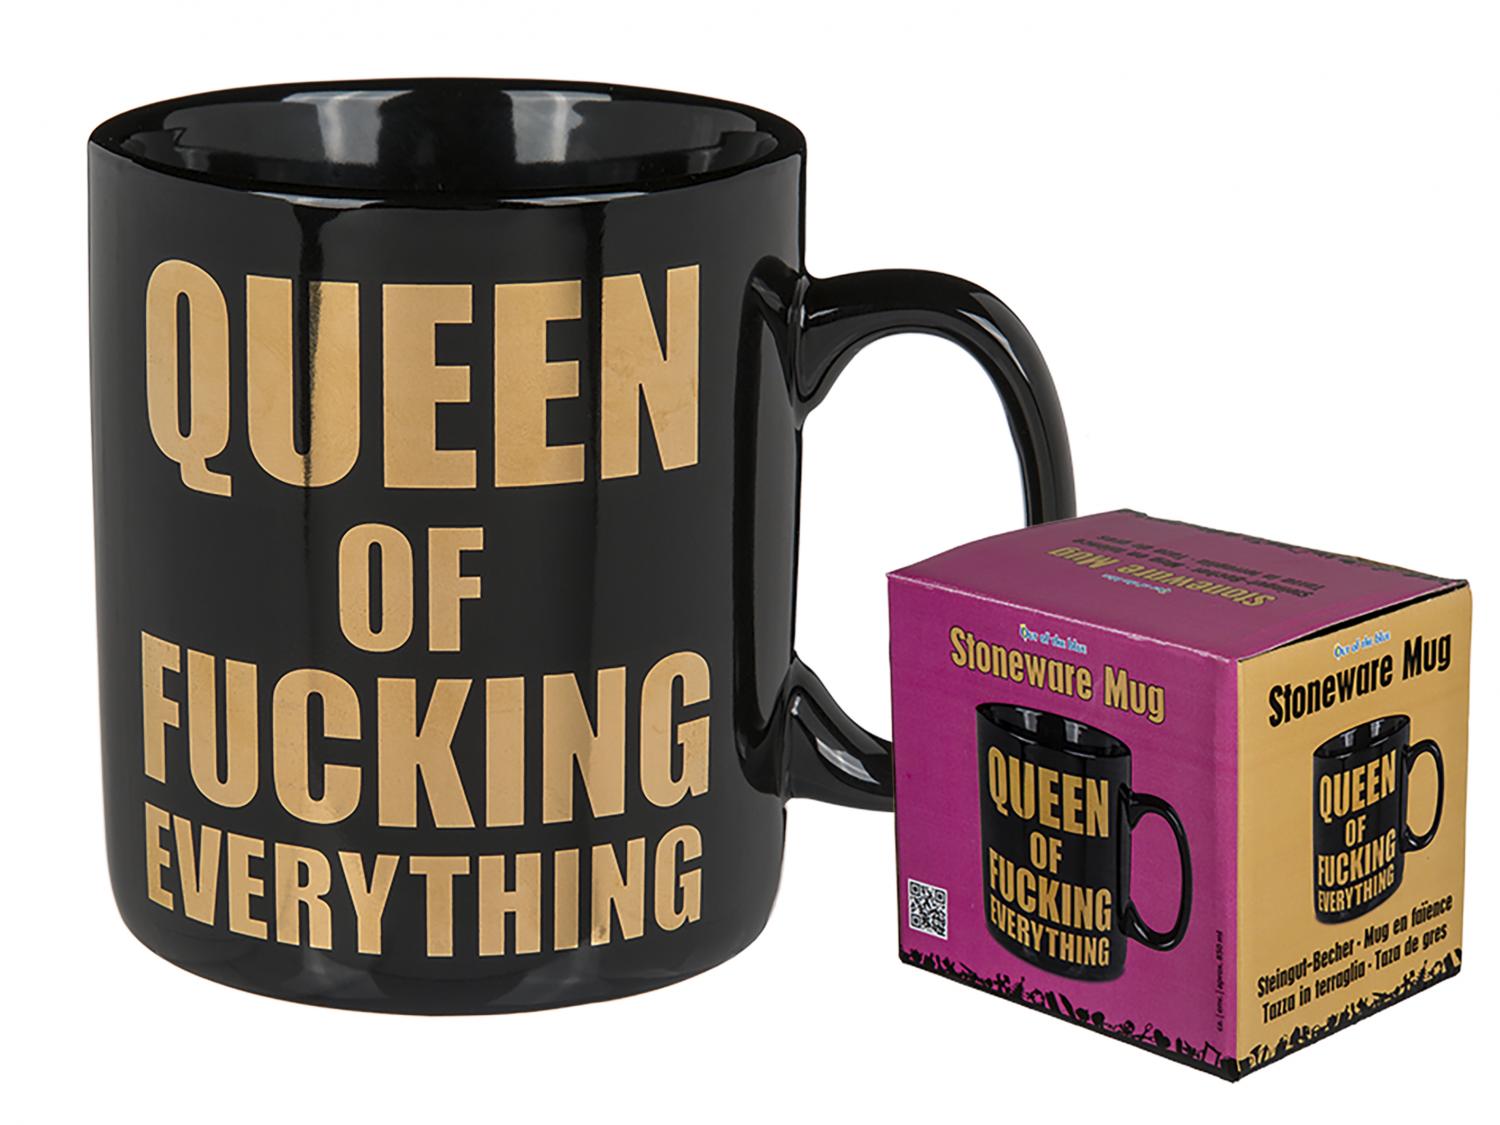 Mugg Queen of everything